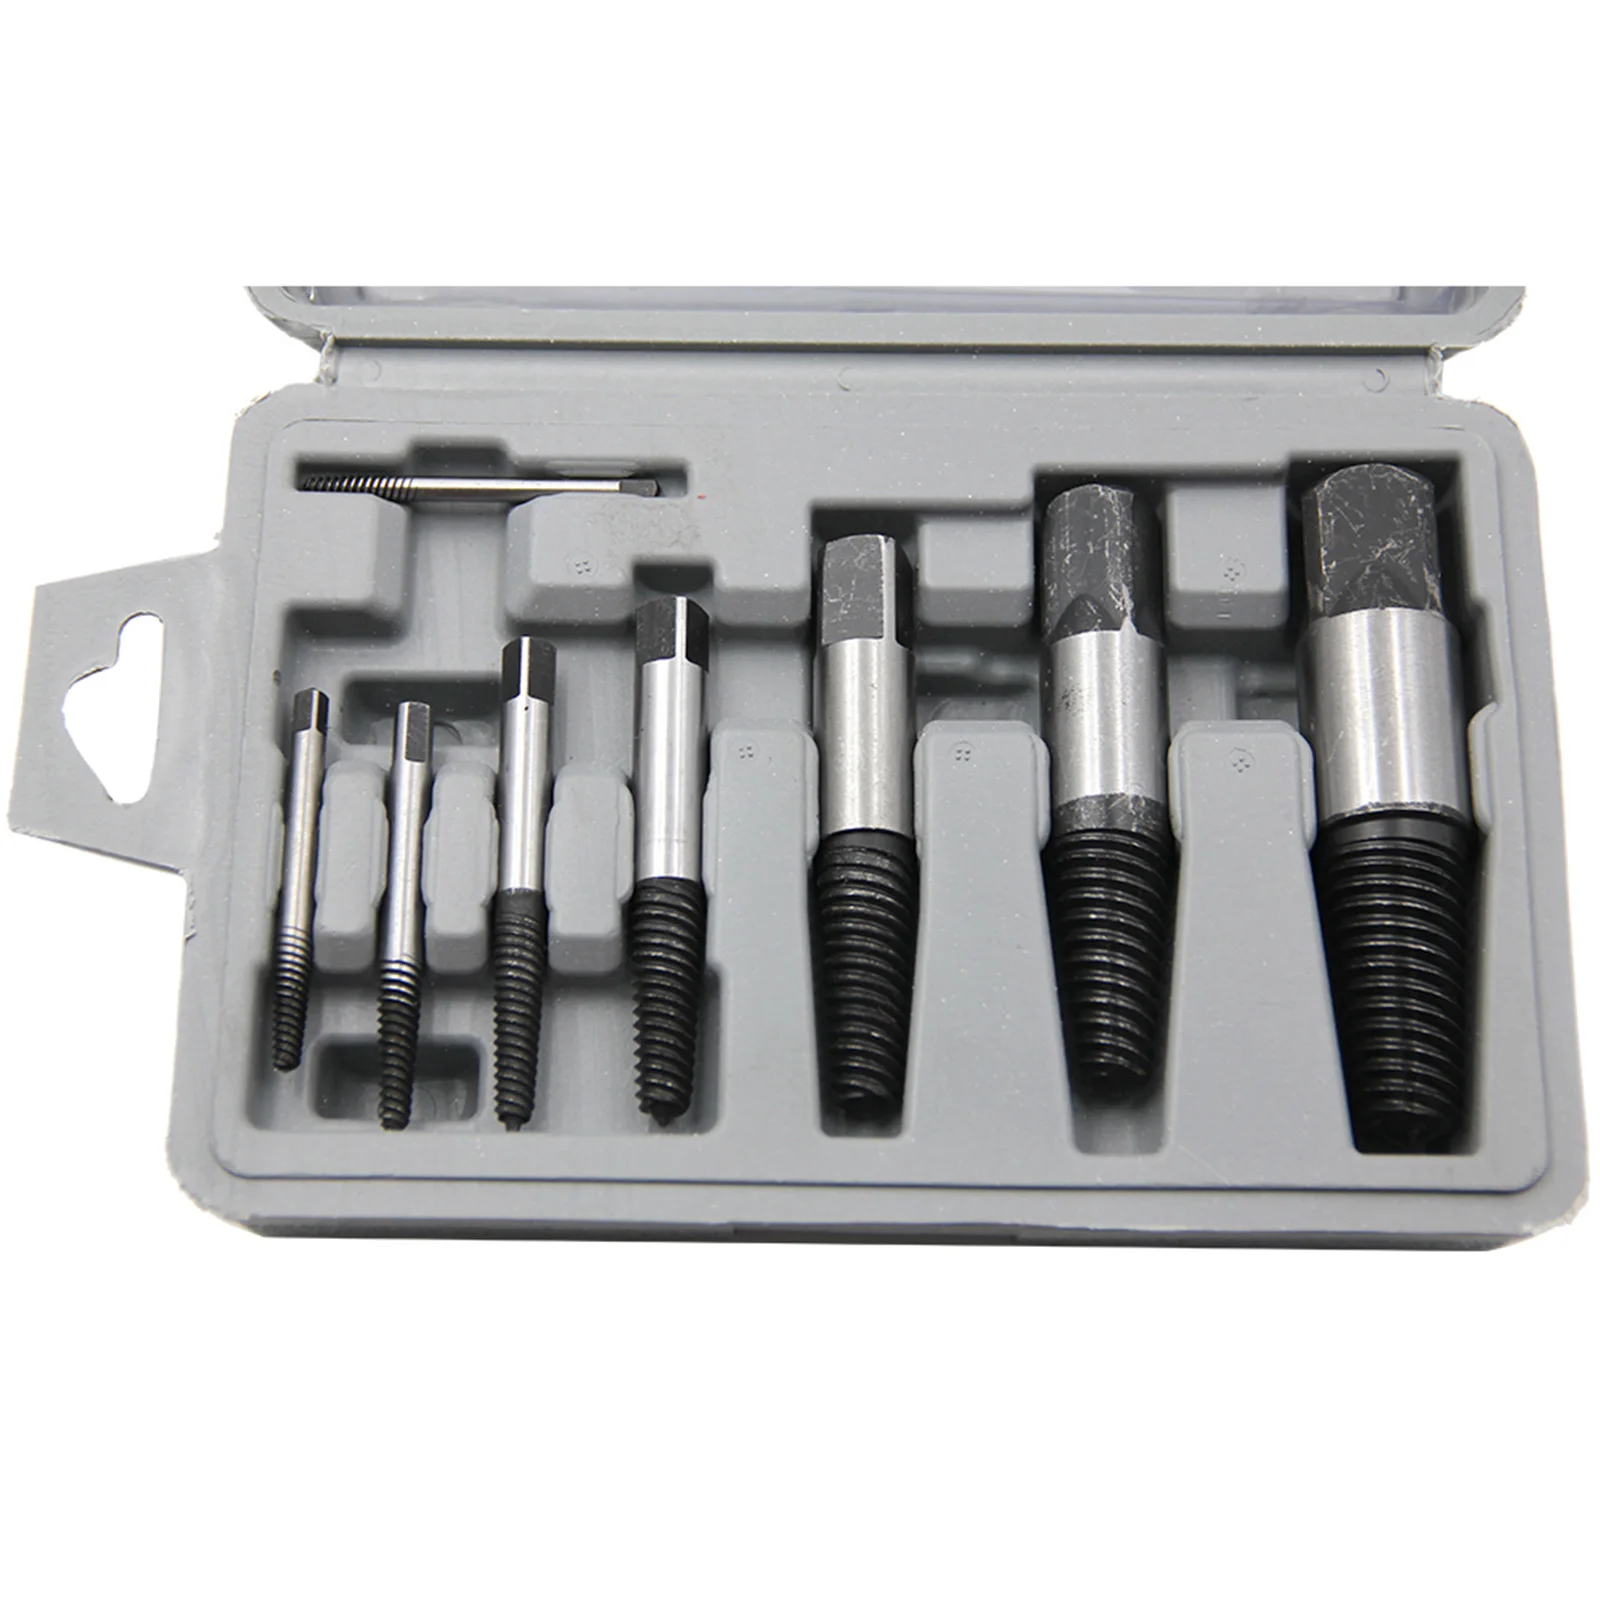 

Screw Extractor Broken Bolt Remover Drill Bits Guide Handwork Tools Multi-function Studs Removing With Storage Box